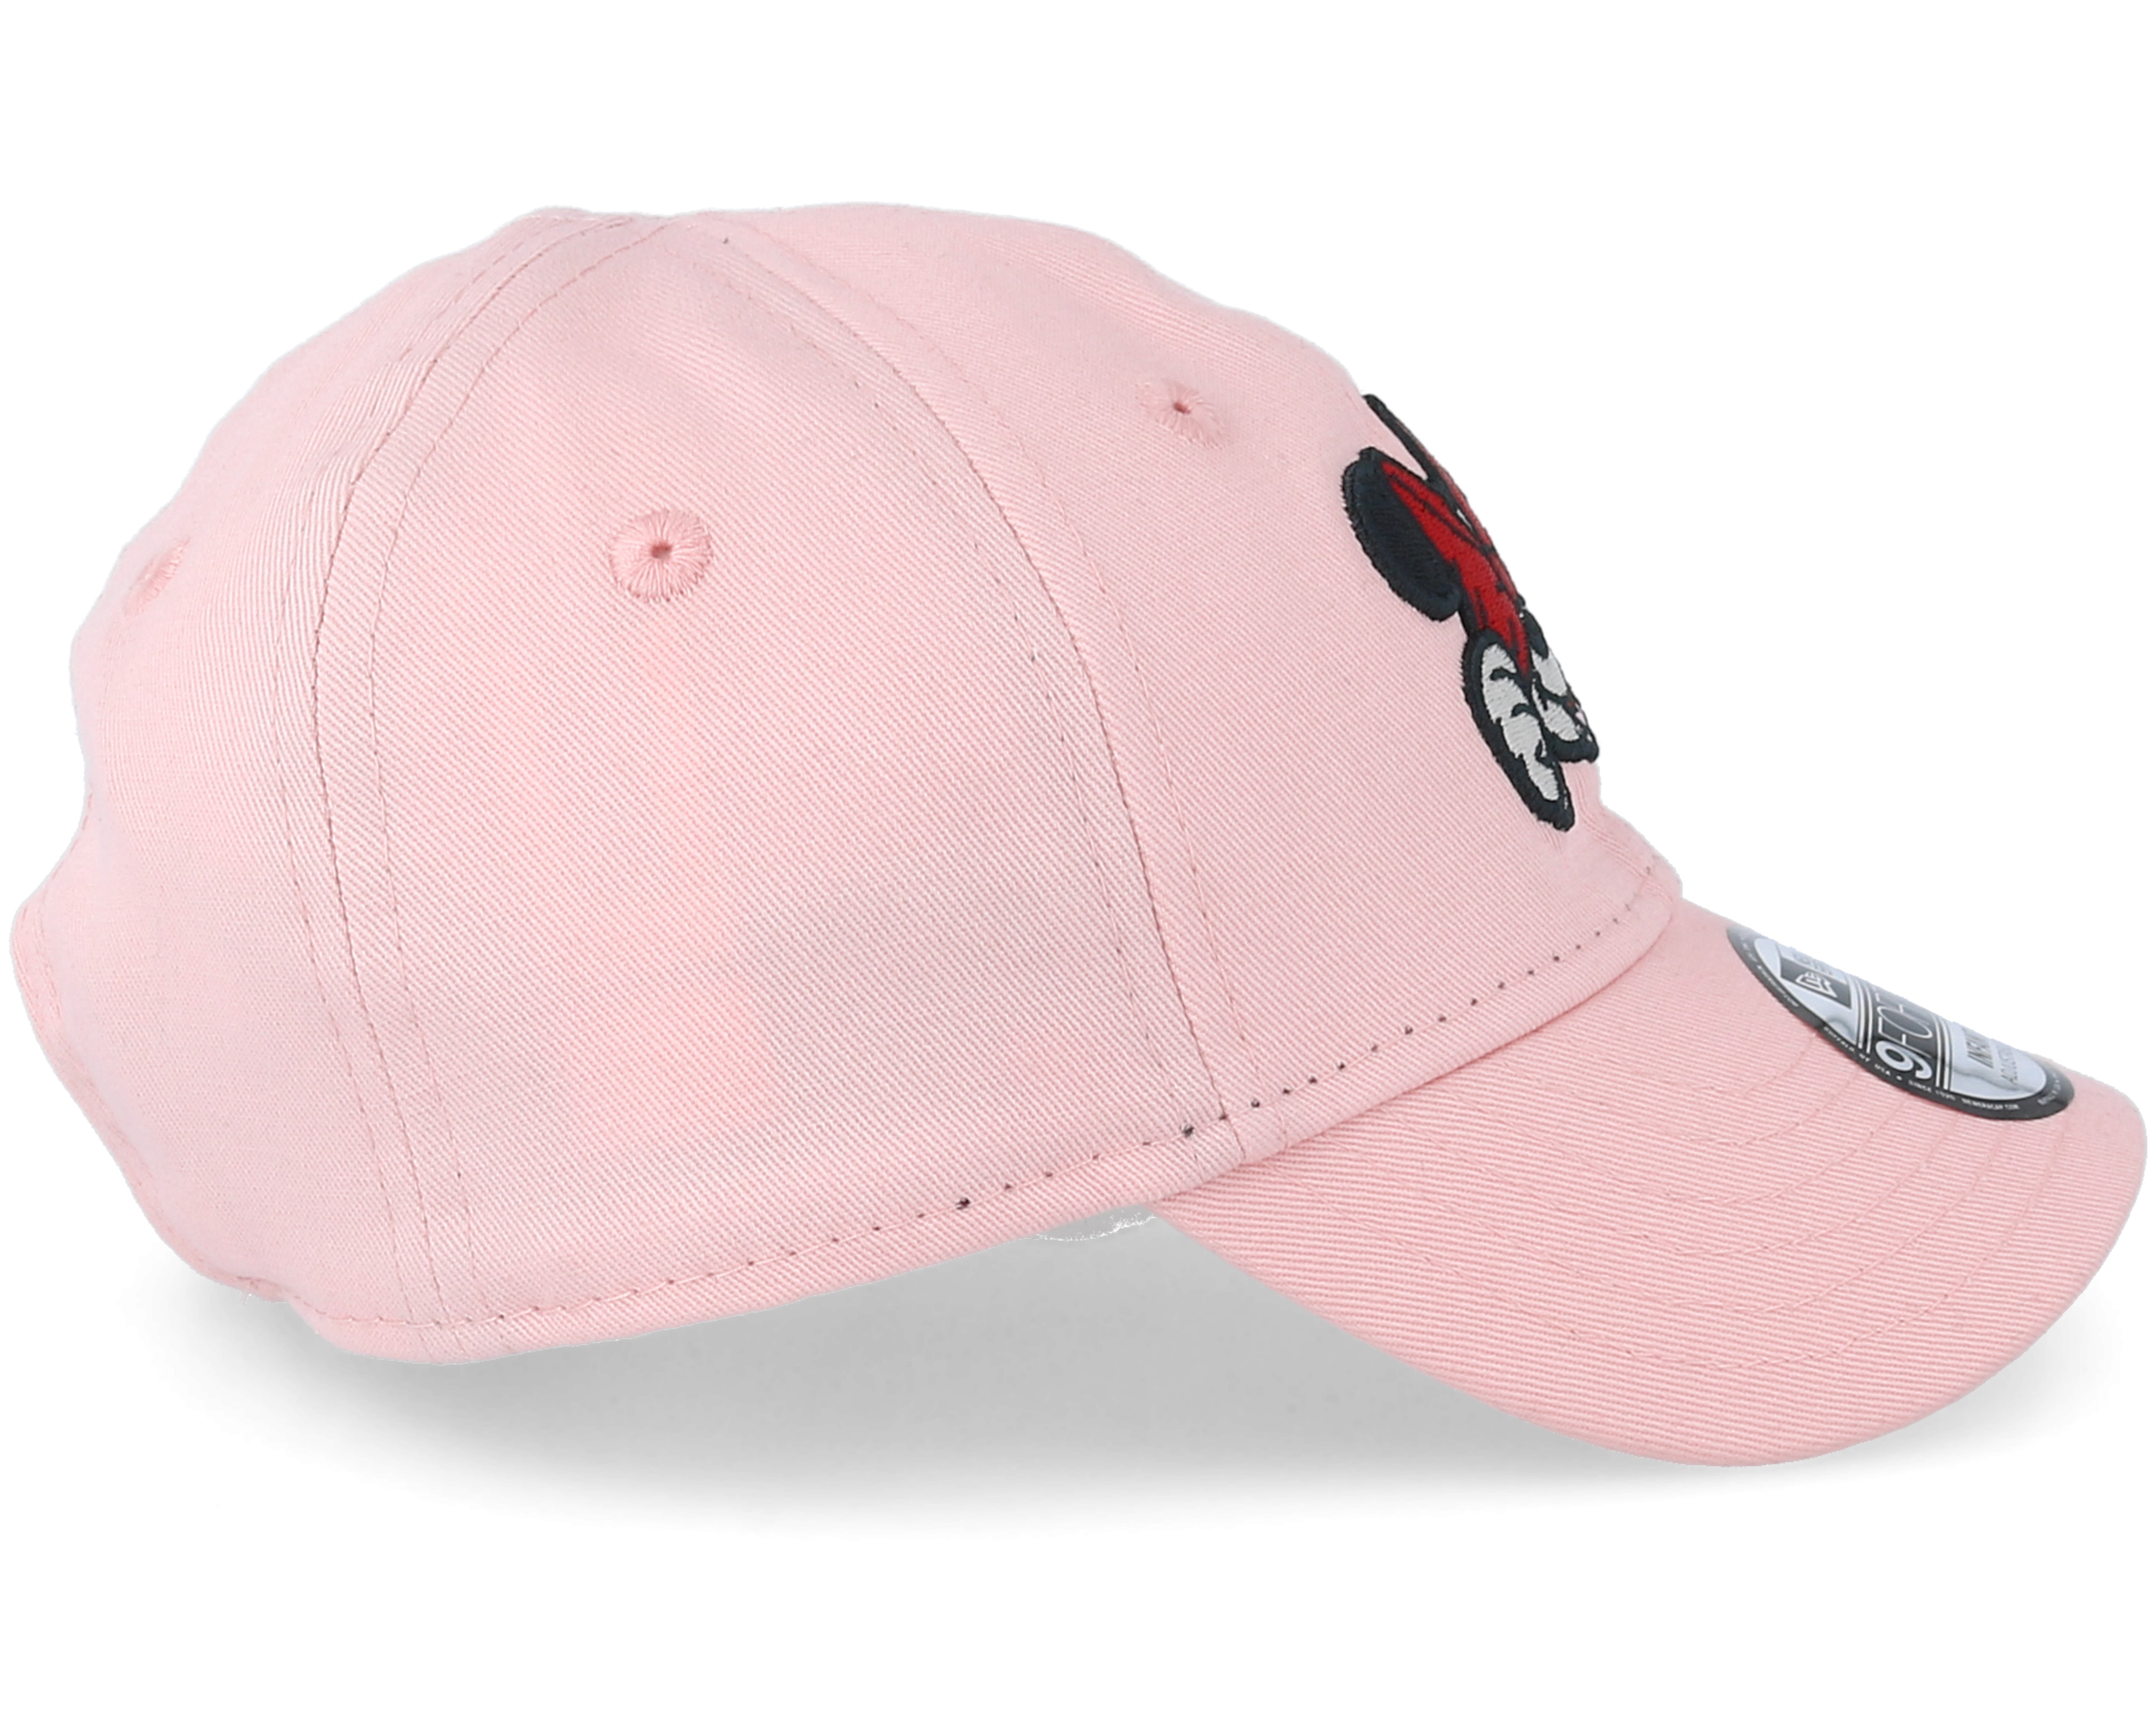 New Era Disney Xpress Minnie Mouse 9Forty Elasticback cap Pink Infant Seaugling